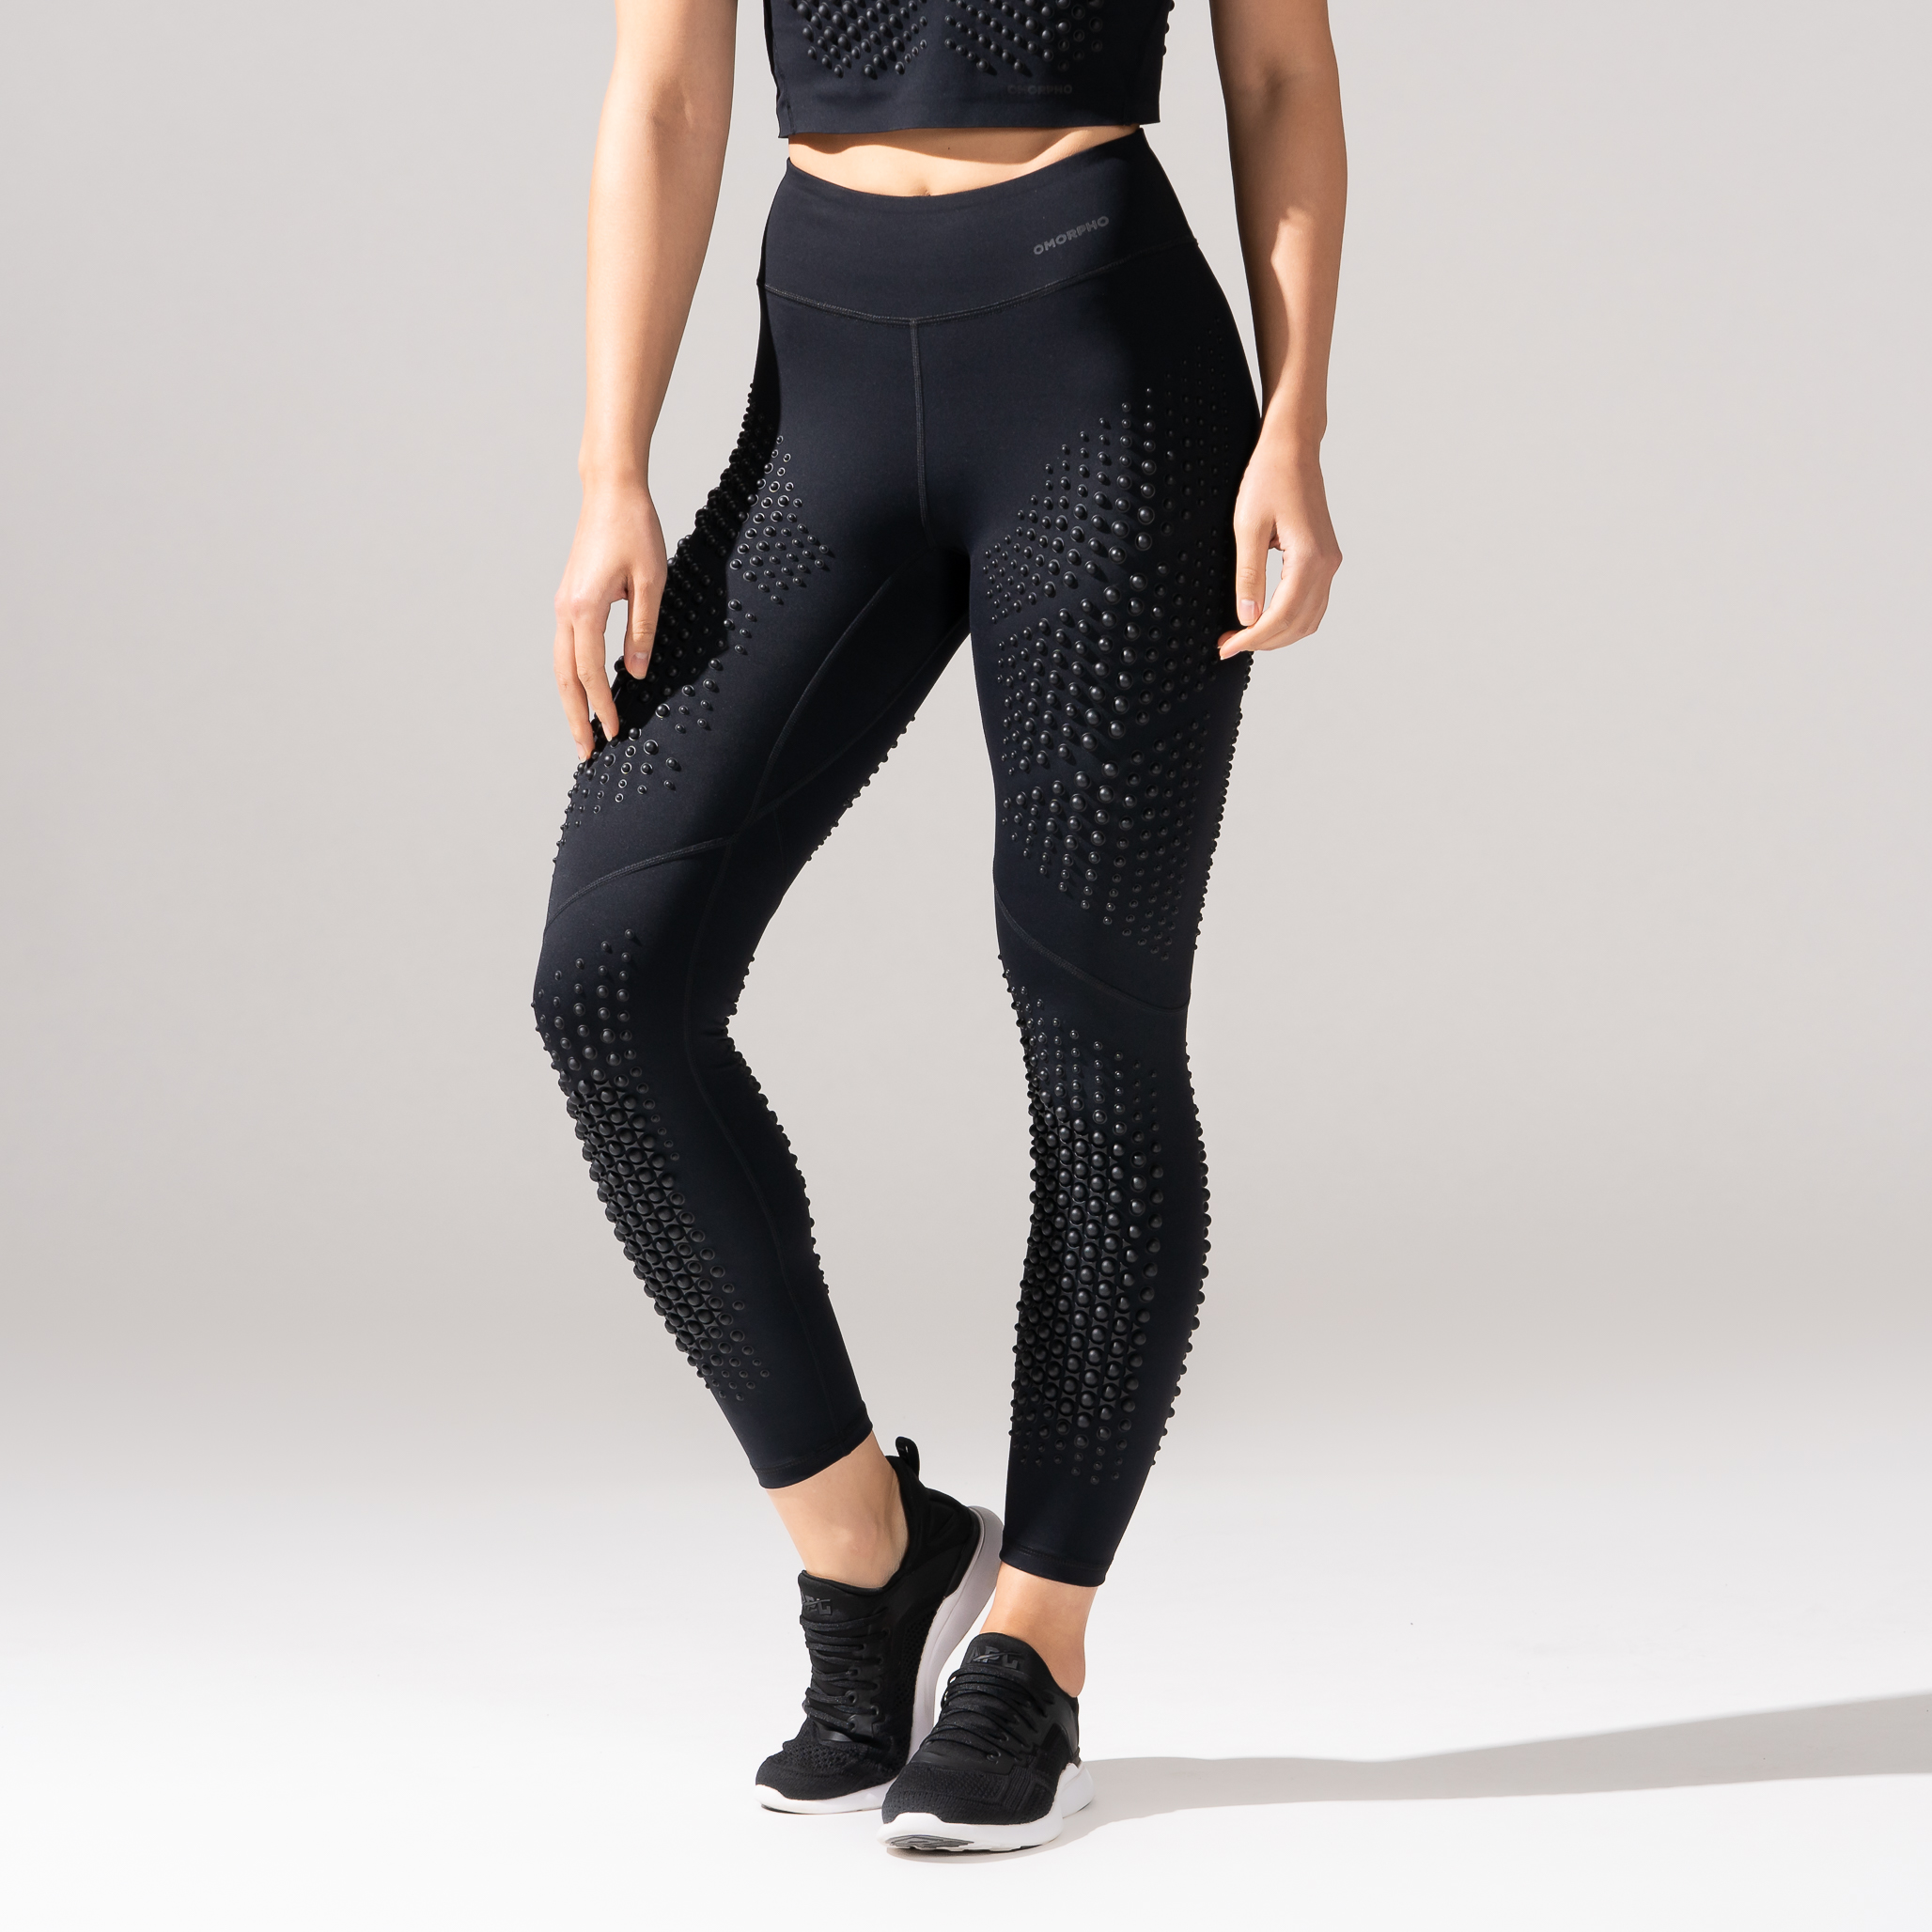 Womens Weighted Leggings, G-Tight, Gravity Sportswear